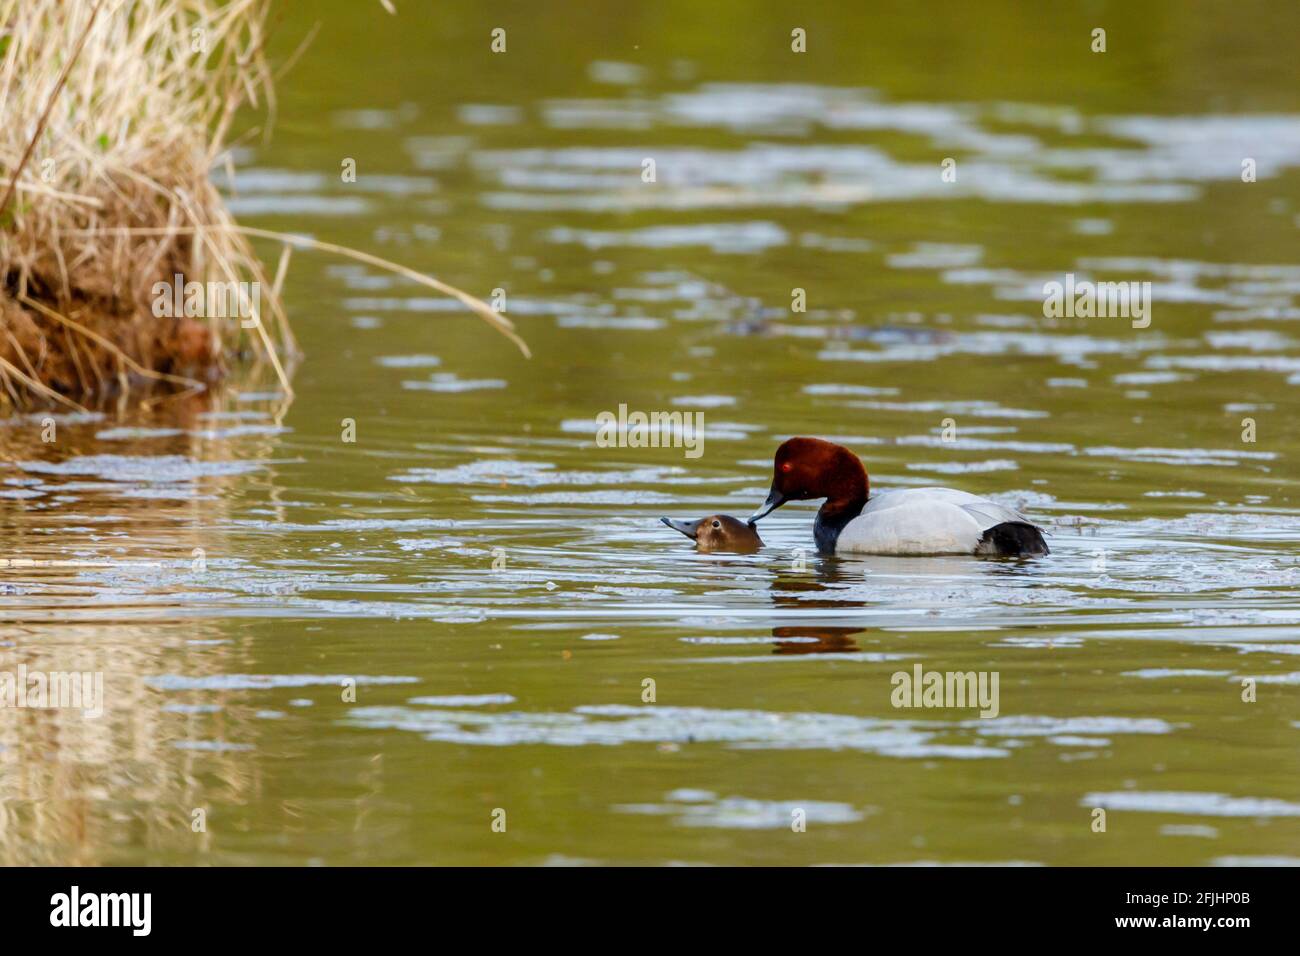 A pochard duck in the water Stock Photo